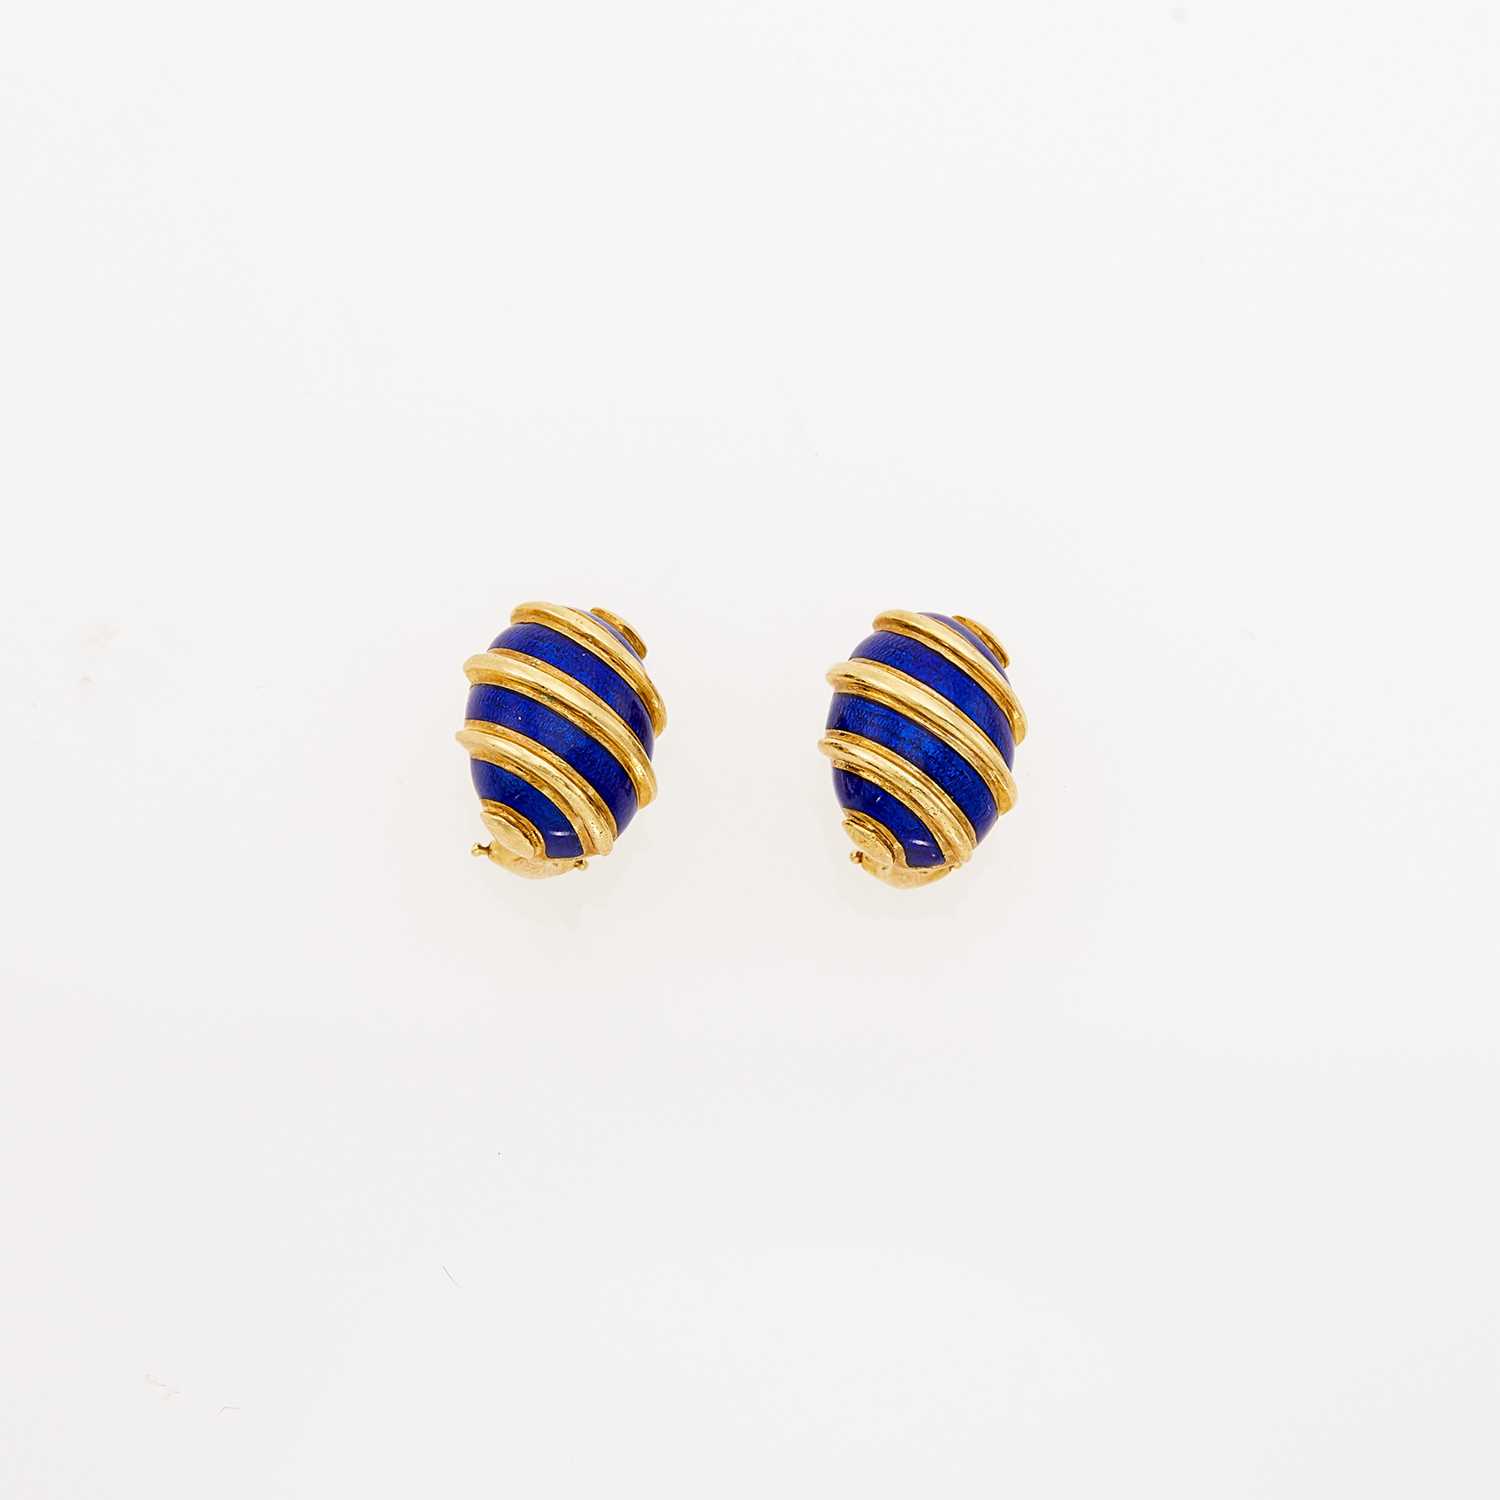 Lot 1018 - Tiffany & Co., Schlumberger Pair of Gold and Blue Enamel Bombé Earclips